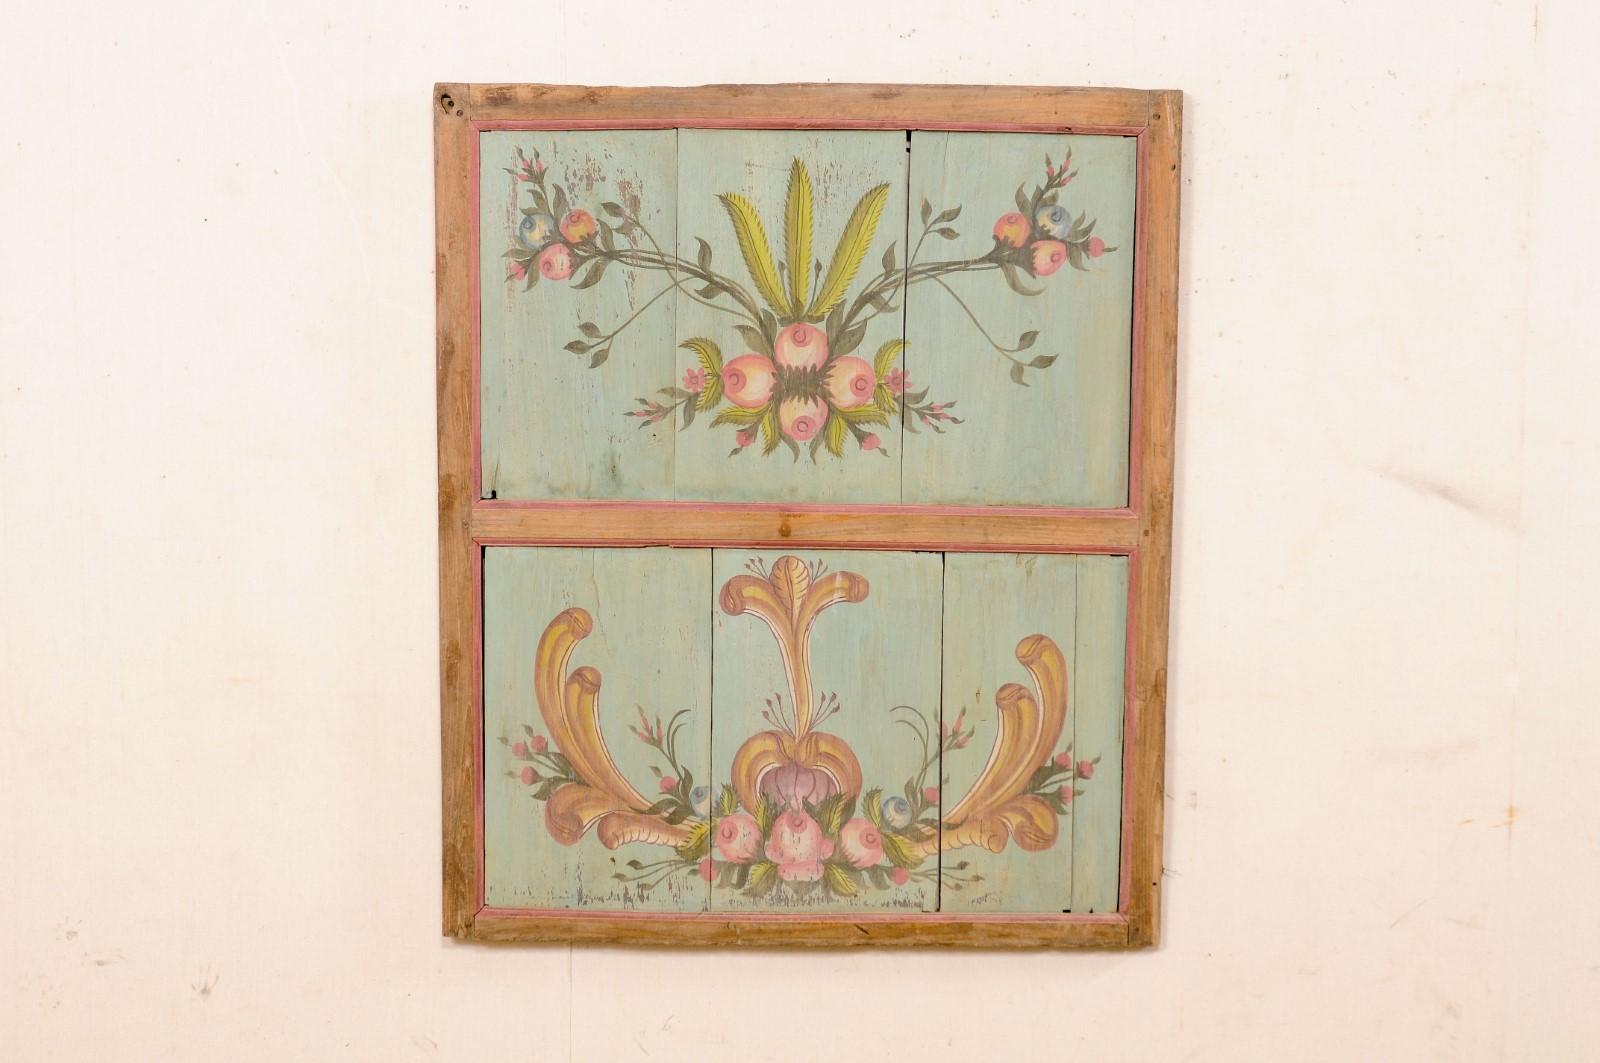 A European hand-painted wooden wall panel from the 19th century. This antique wall plaque from Europe (possibly German or Austrian) is comprised of a rectangular-shaped frame, with two recessed board panels (one atop the other). The inset panels